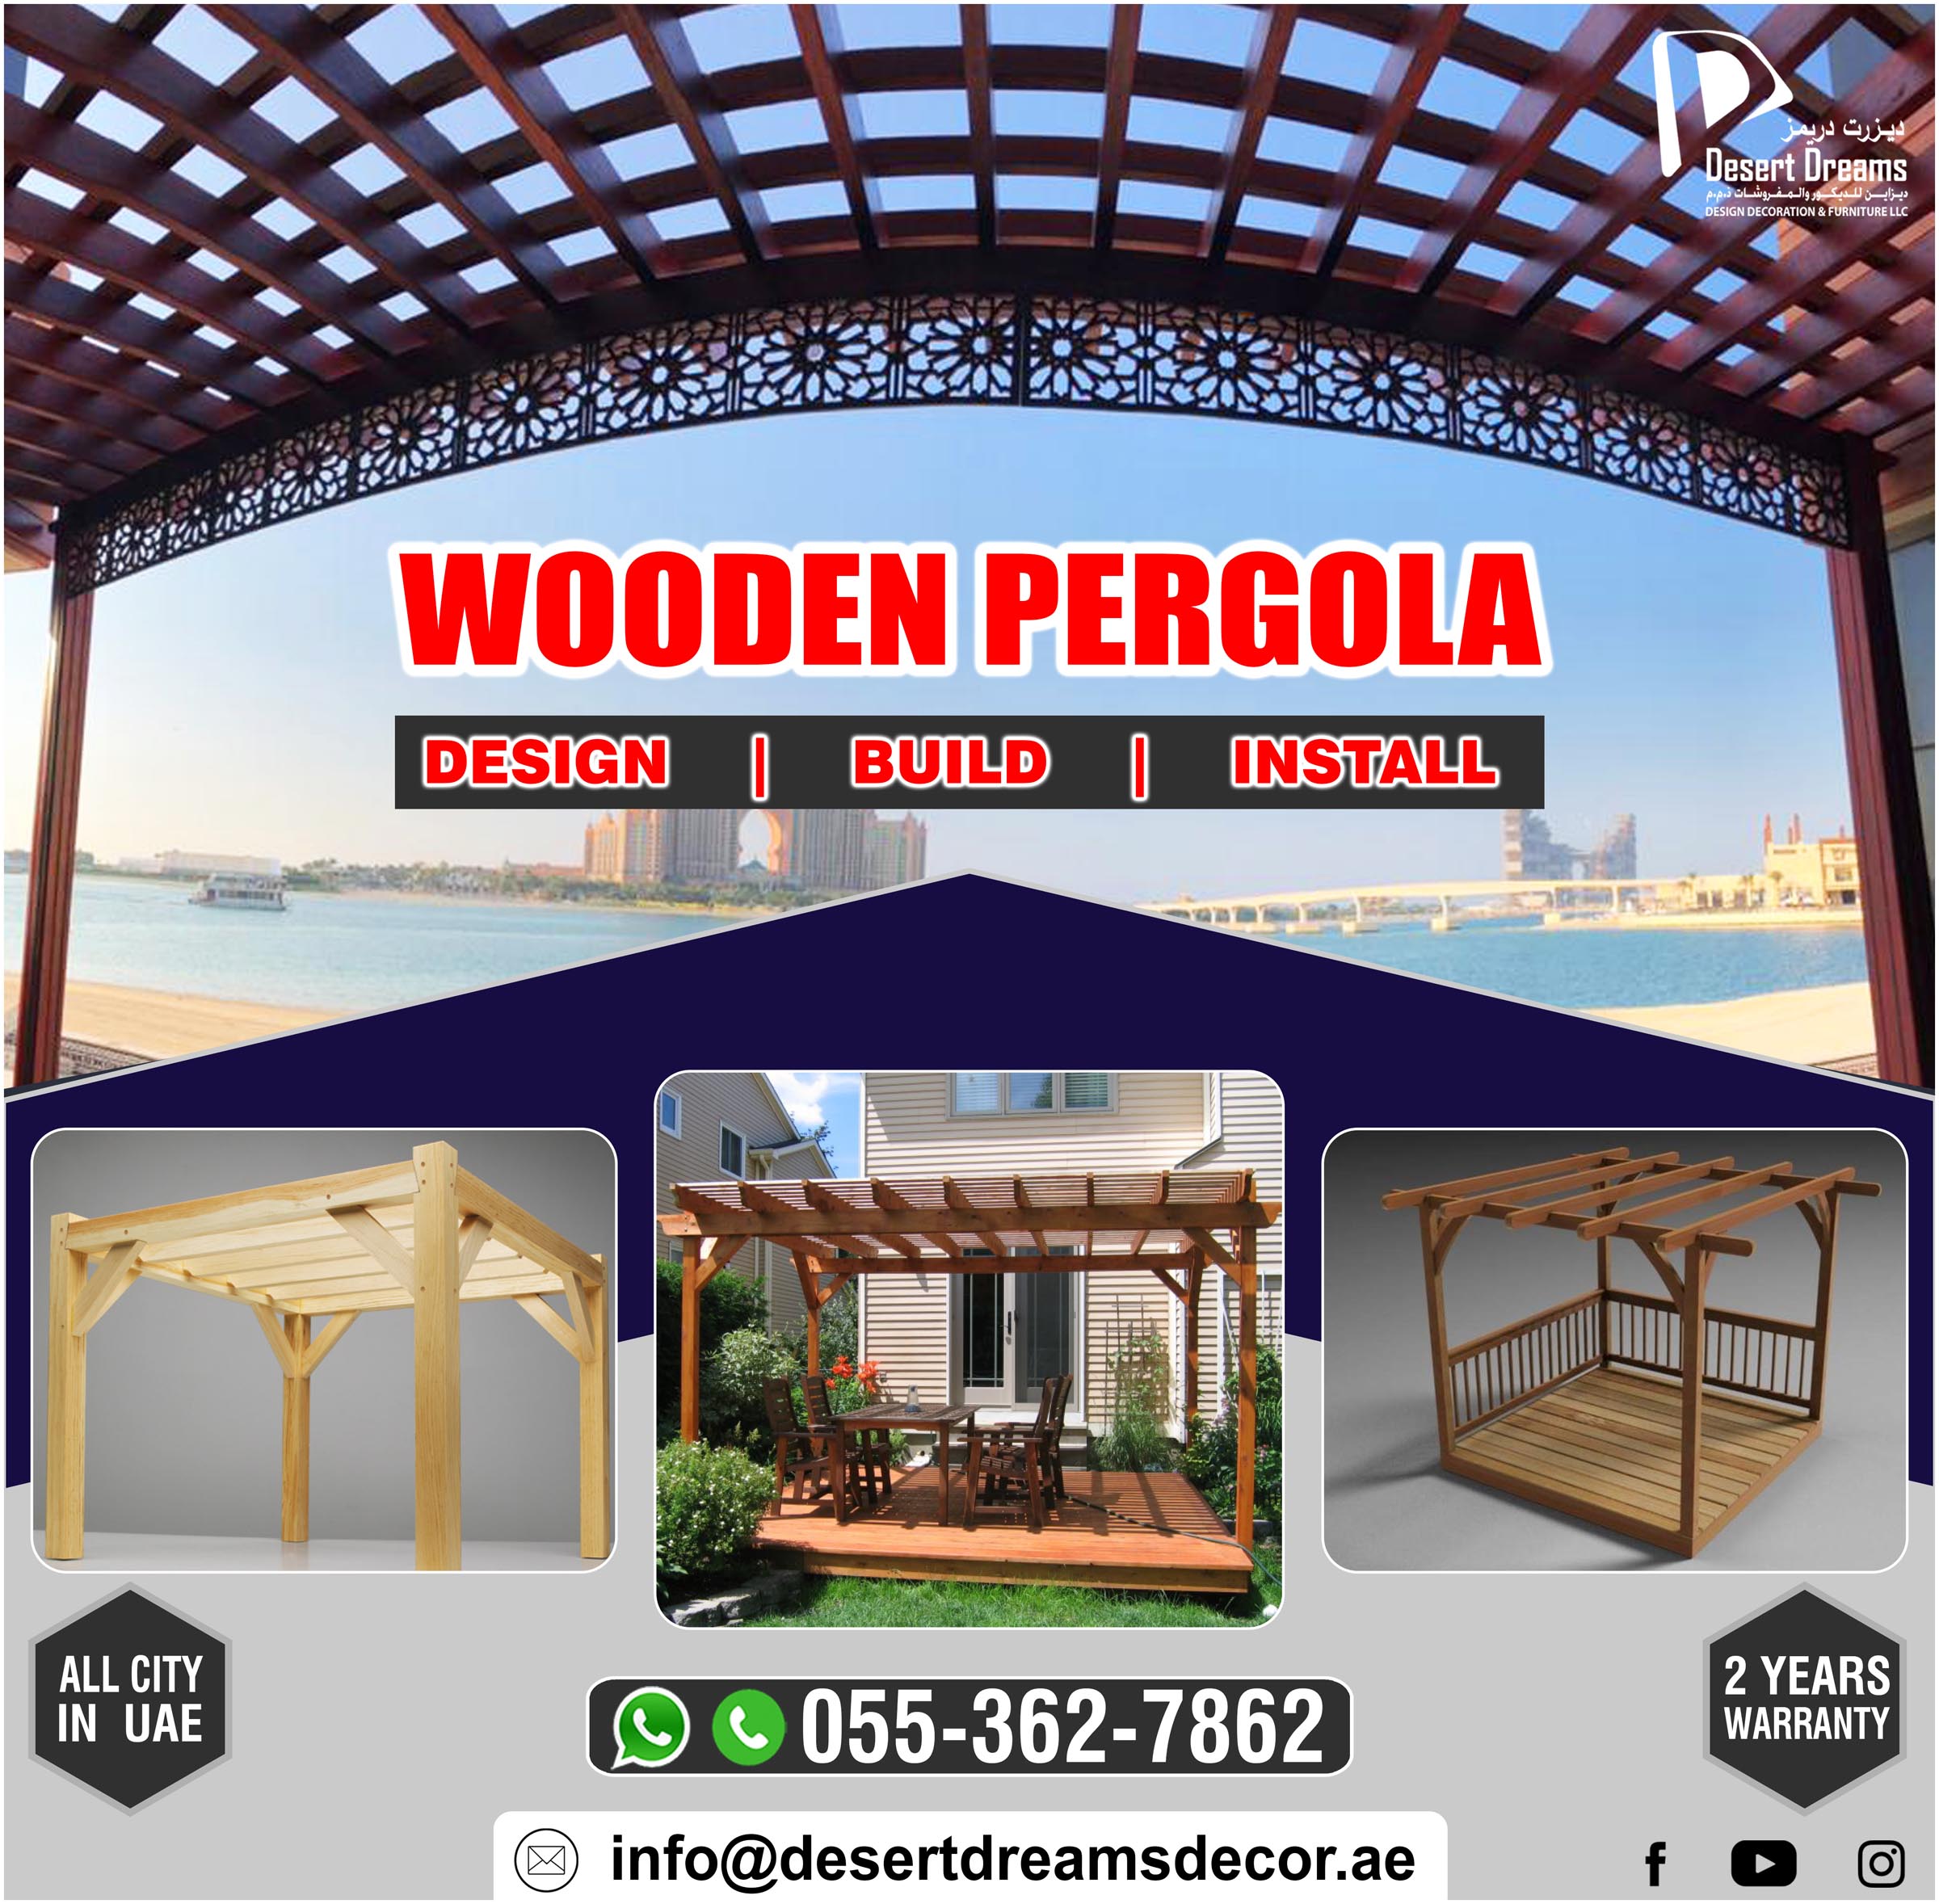 Design, Supply and Install Wooden Pergola | All City in Uae.